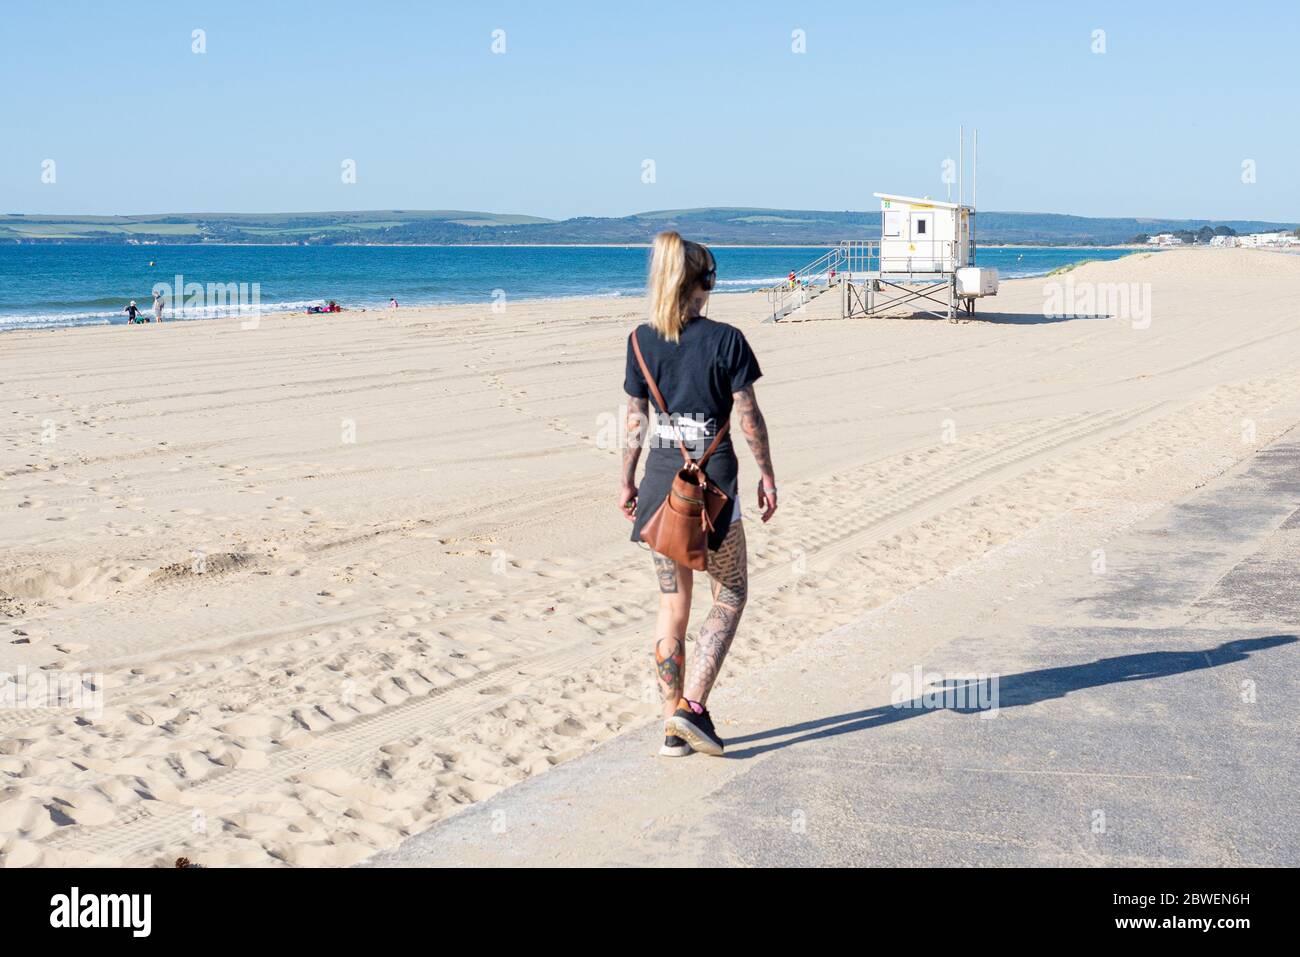 Branksome Chine Beach, Poole, Dorset, UK, 1st June 2020, Weather. More brilliant morning sunshine on the first day of meteorological summer following the sunniest spring on record in the UK. It’s Monday morning and the weekend crowds have gone. A young woman walks along the promenade Credit: Paul Biggins/Alamy Live News Stock Photo